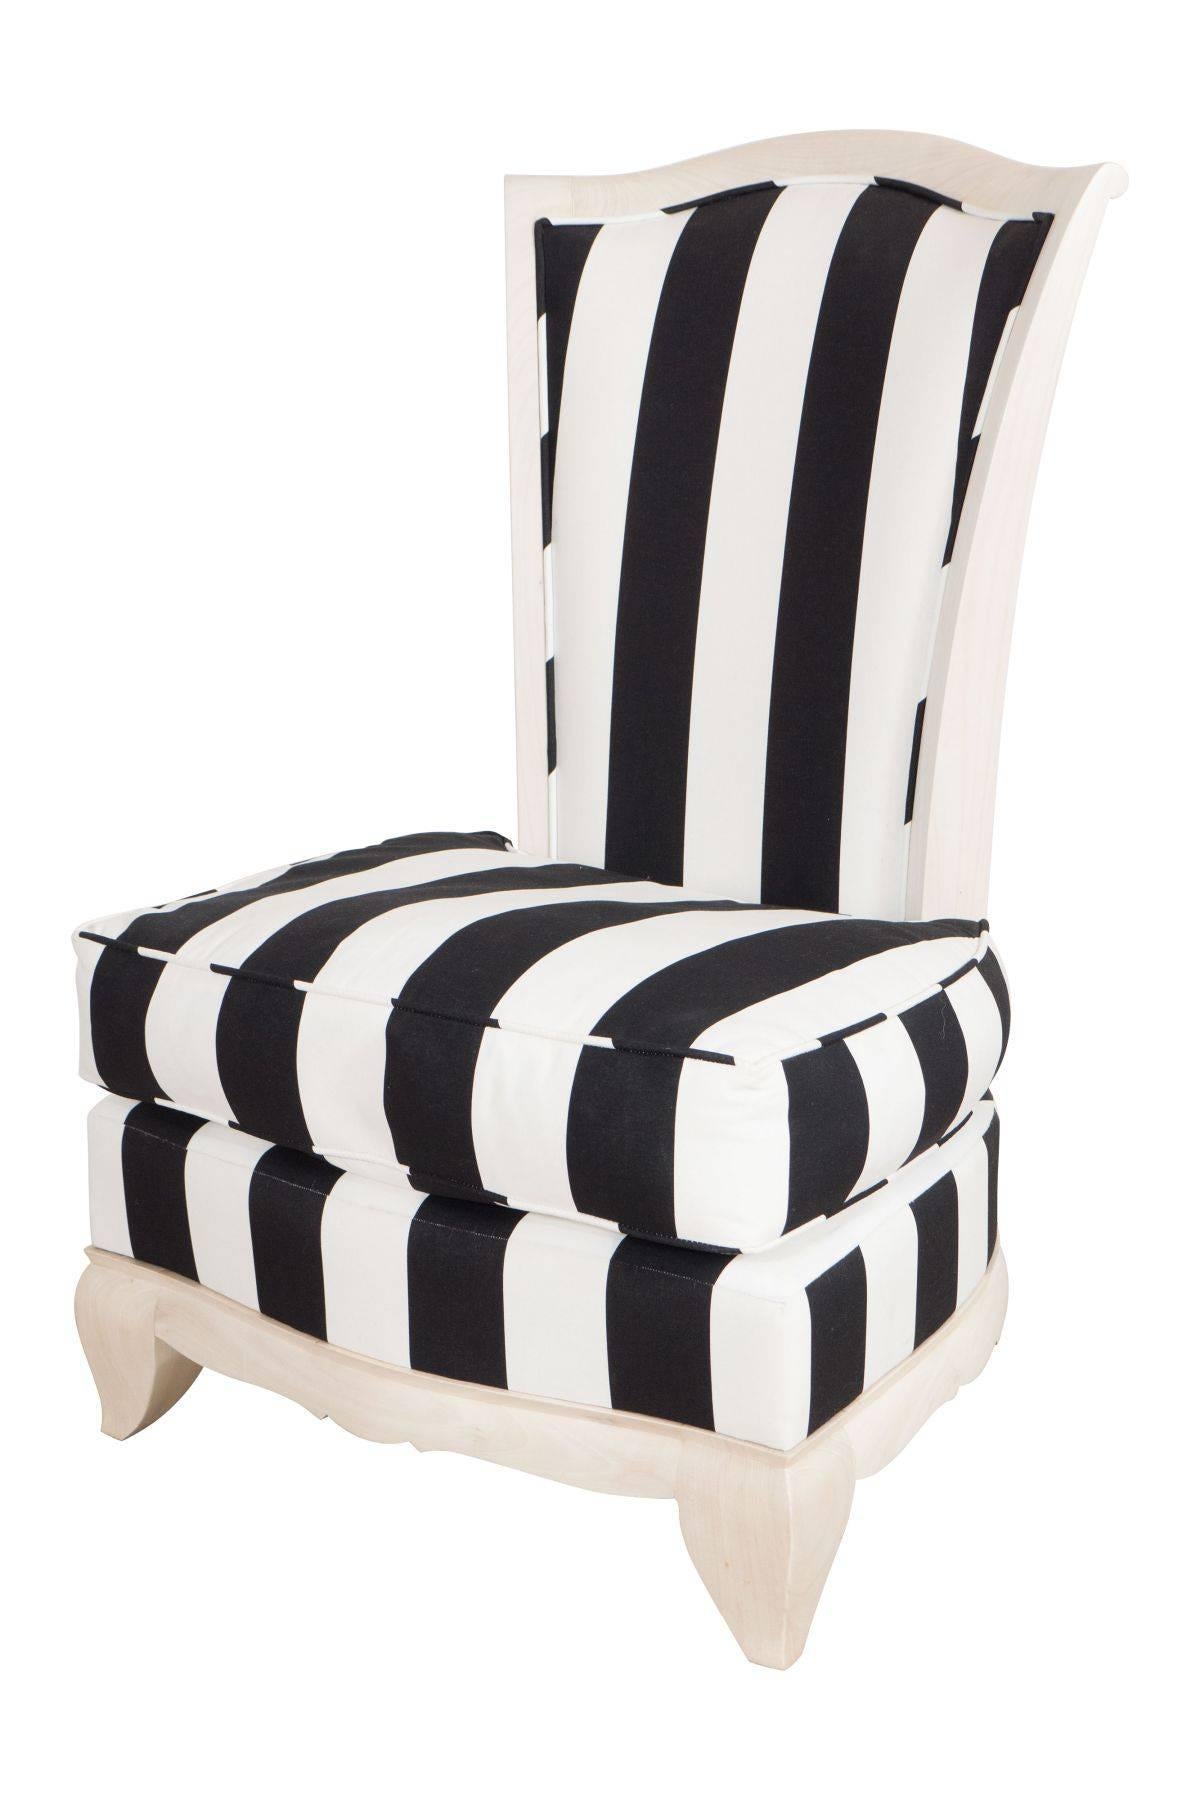 Pair of petite slipper chairs with light cerused oak frame, upholstered in bold black and white striped Marimekko fabric, France, circa 1940.